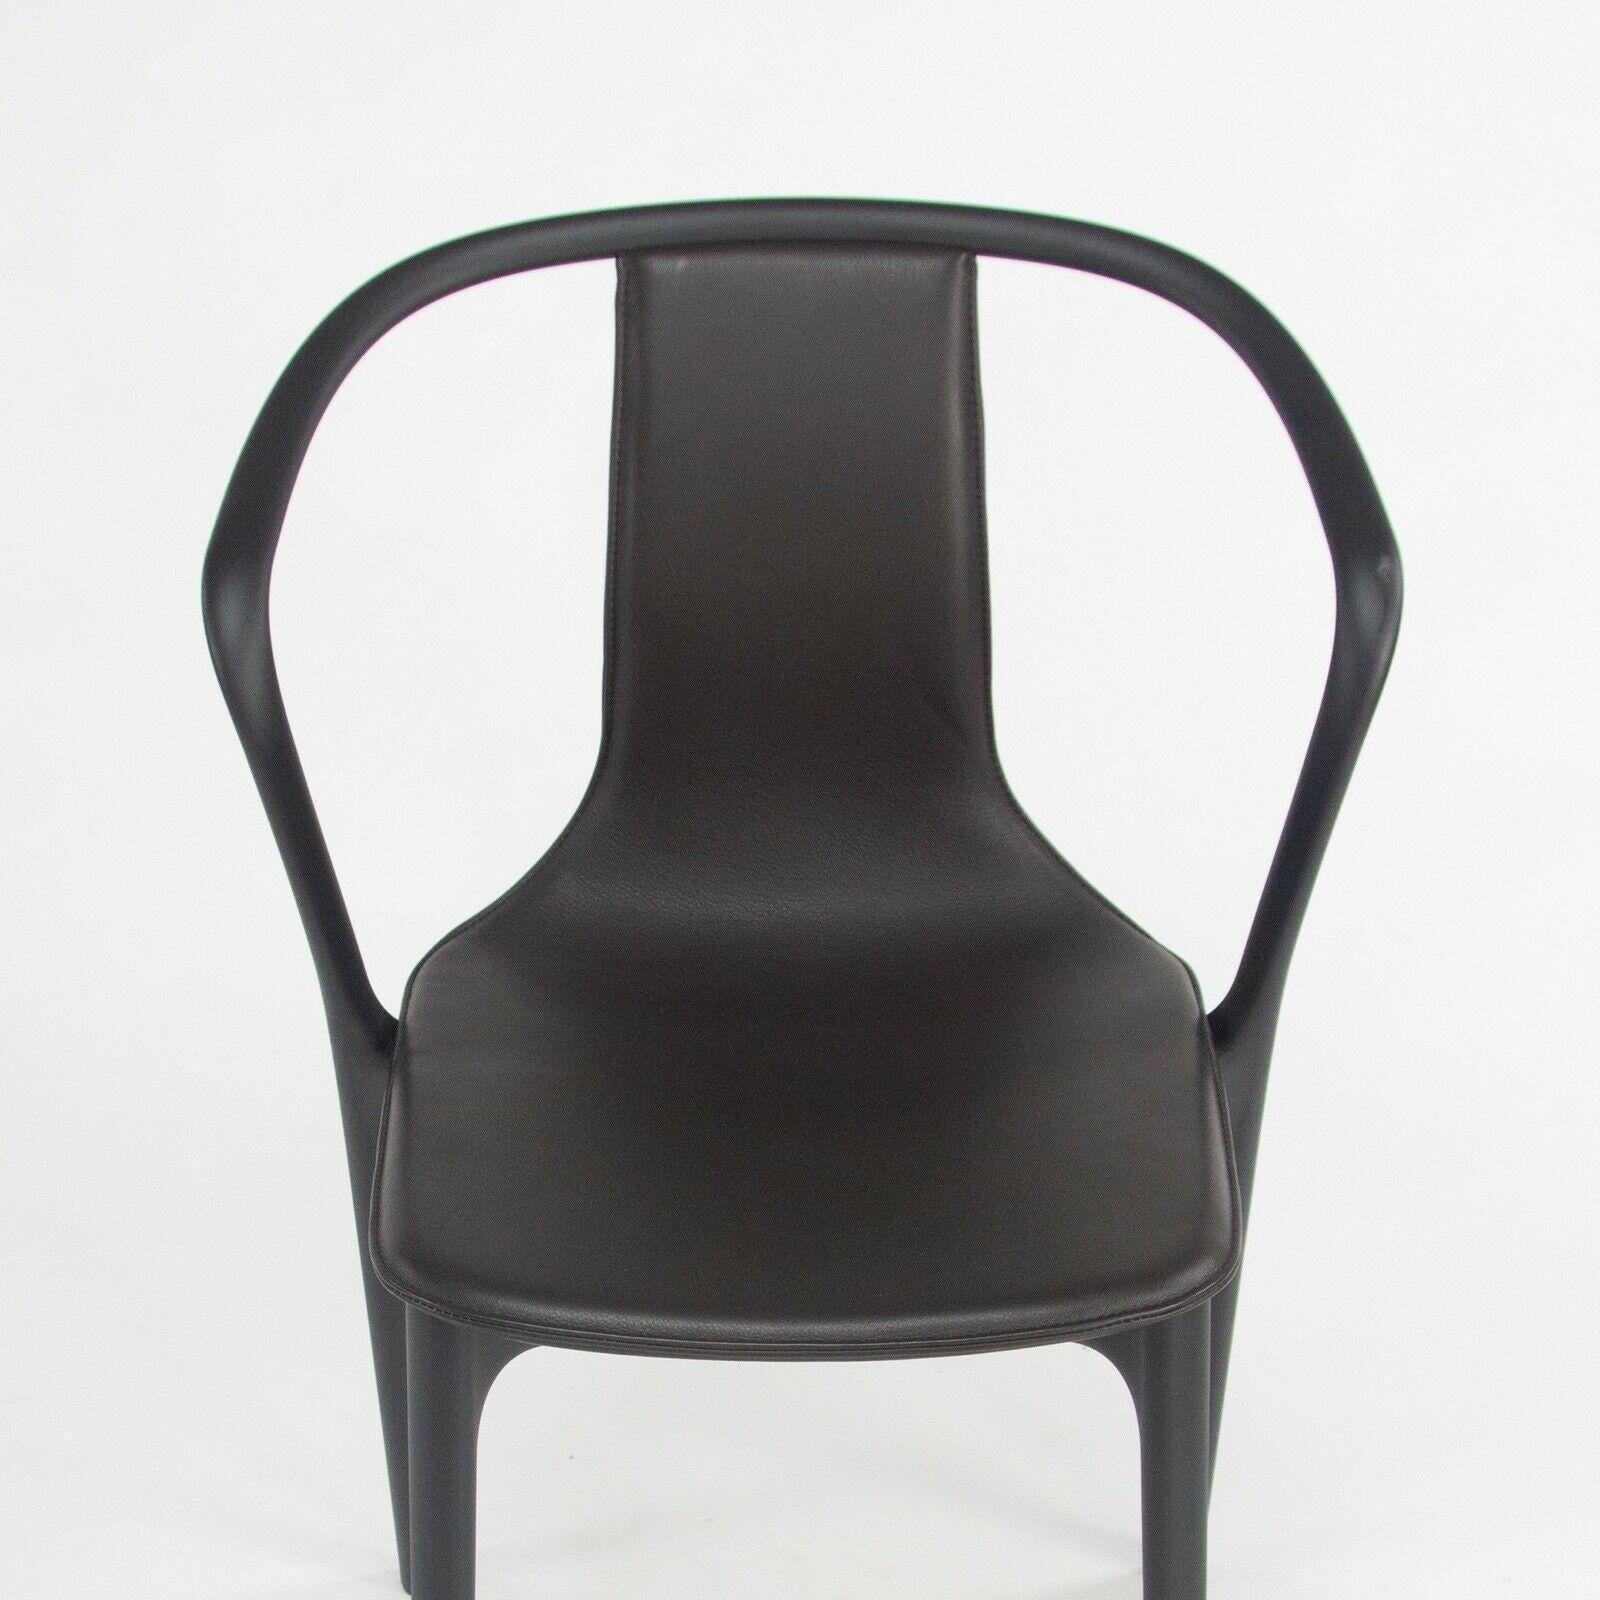 C. 2019 Vitra Belleville Armchair in Brown Leather by Ronan & Erwan Bouroullec For Sale 5